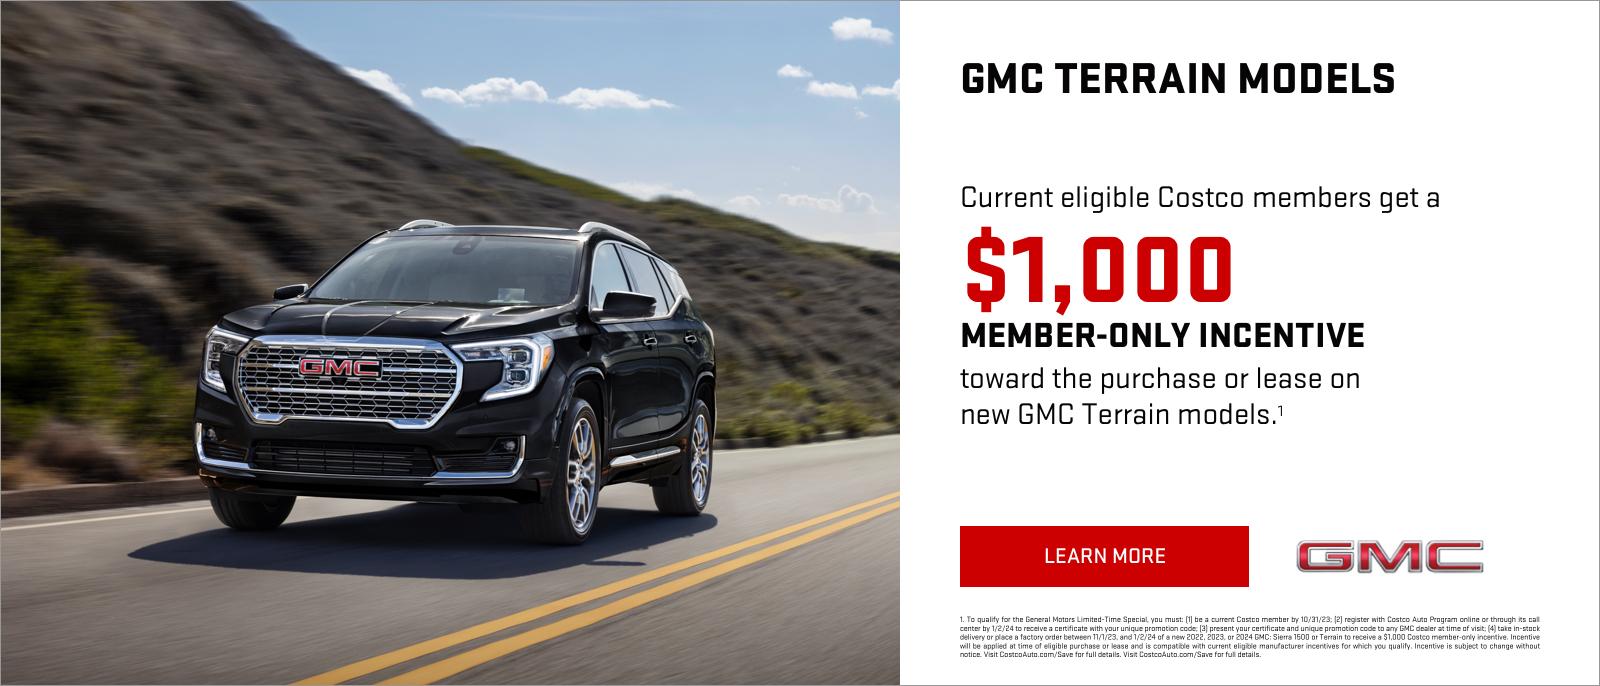 CURRENT ELIGIBLE COSTCO MEMBERS GET A
$1,000 MEMBER-ONLY INCENTIVE
TOWARD THE PURCHASE OR LEASE
ON NEW GMC TERRAIN MODELS1